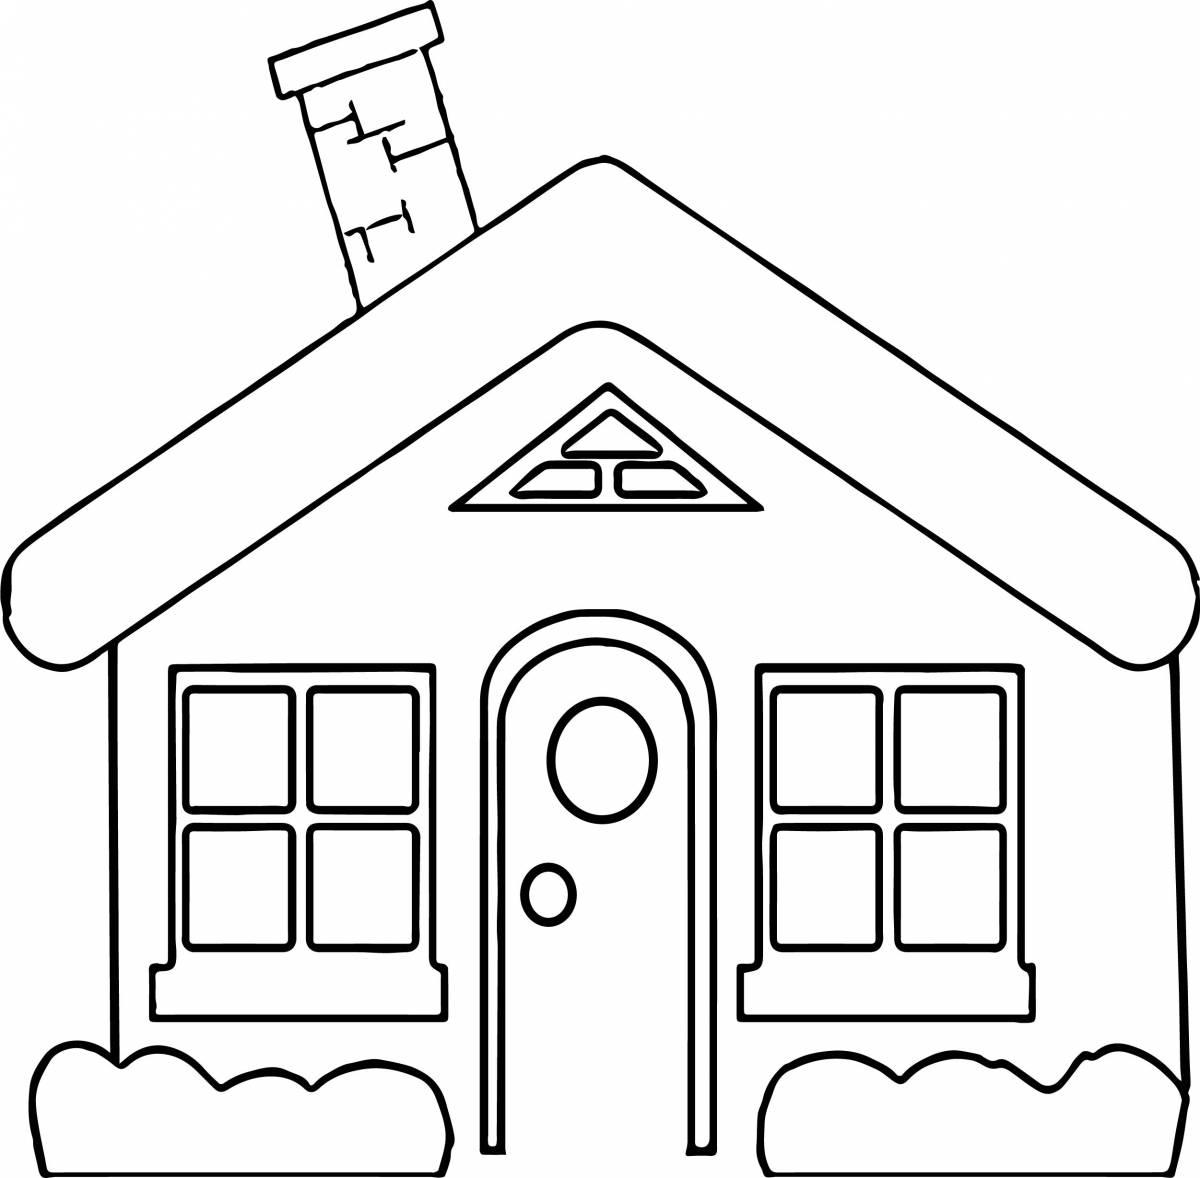 Playful house drawing sheet for children